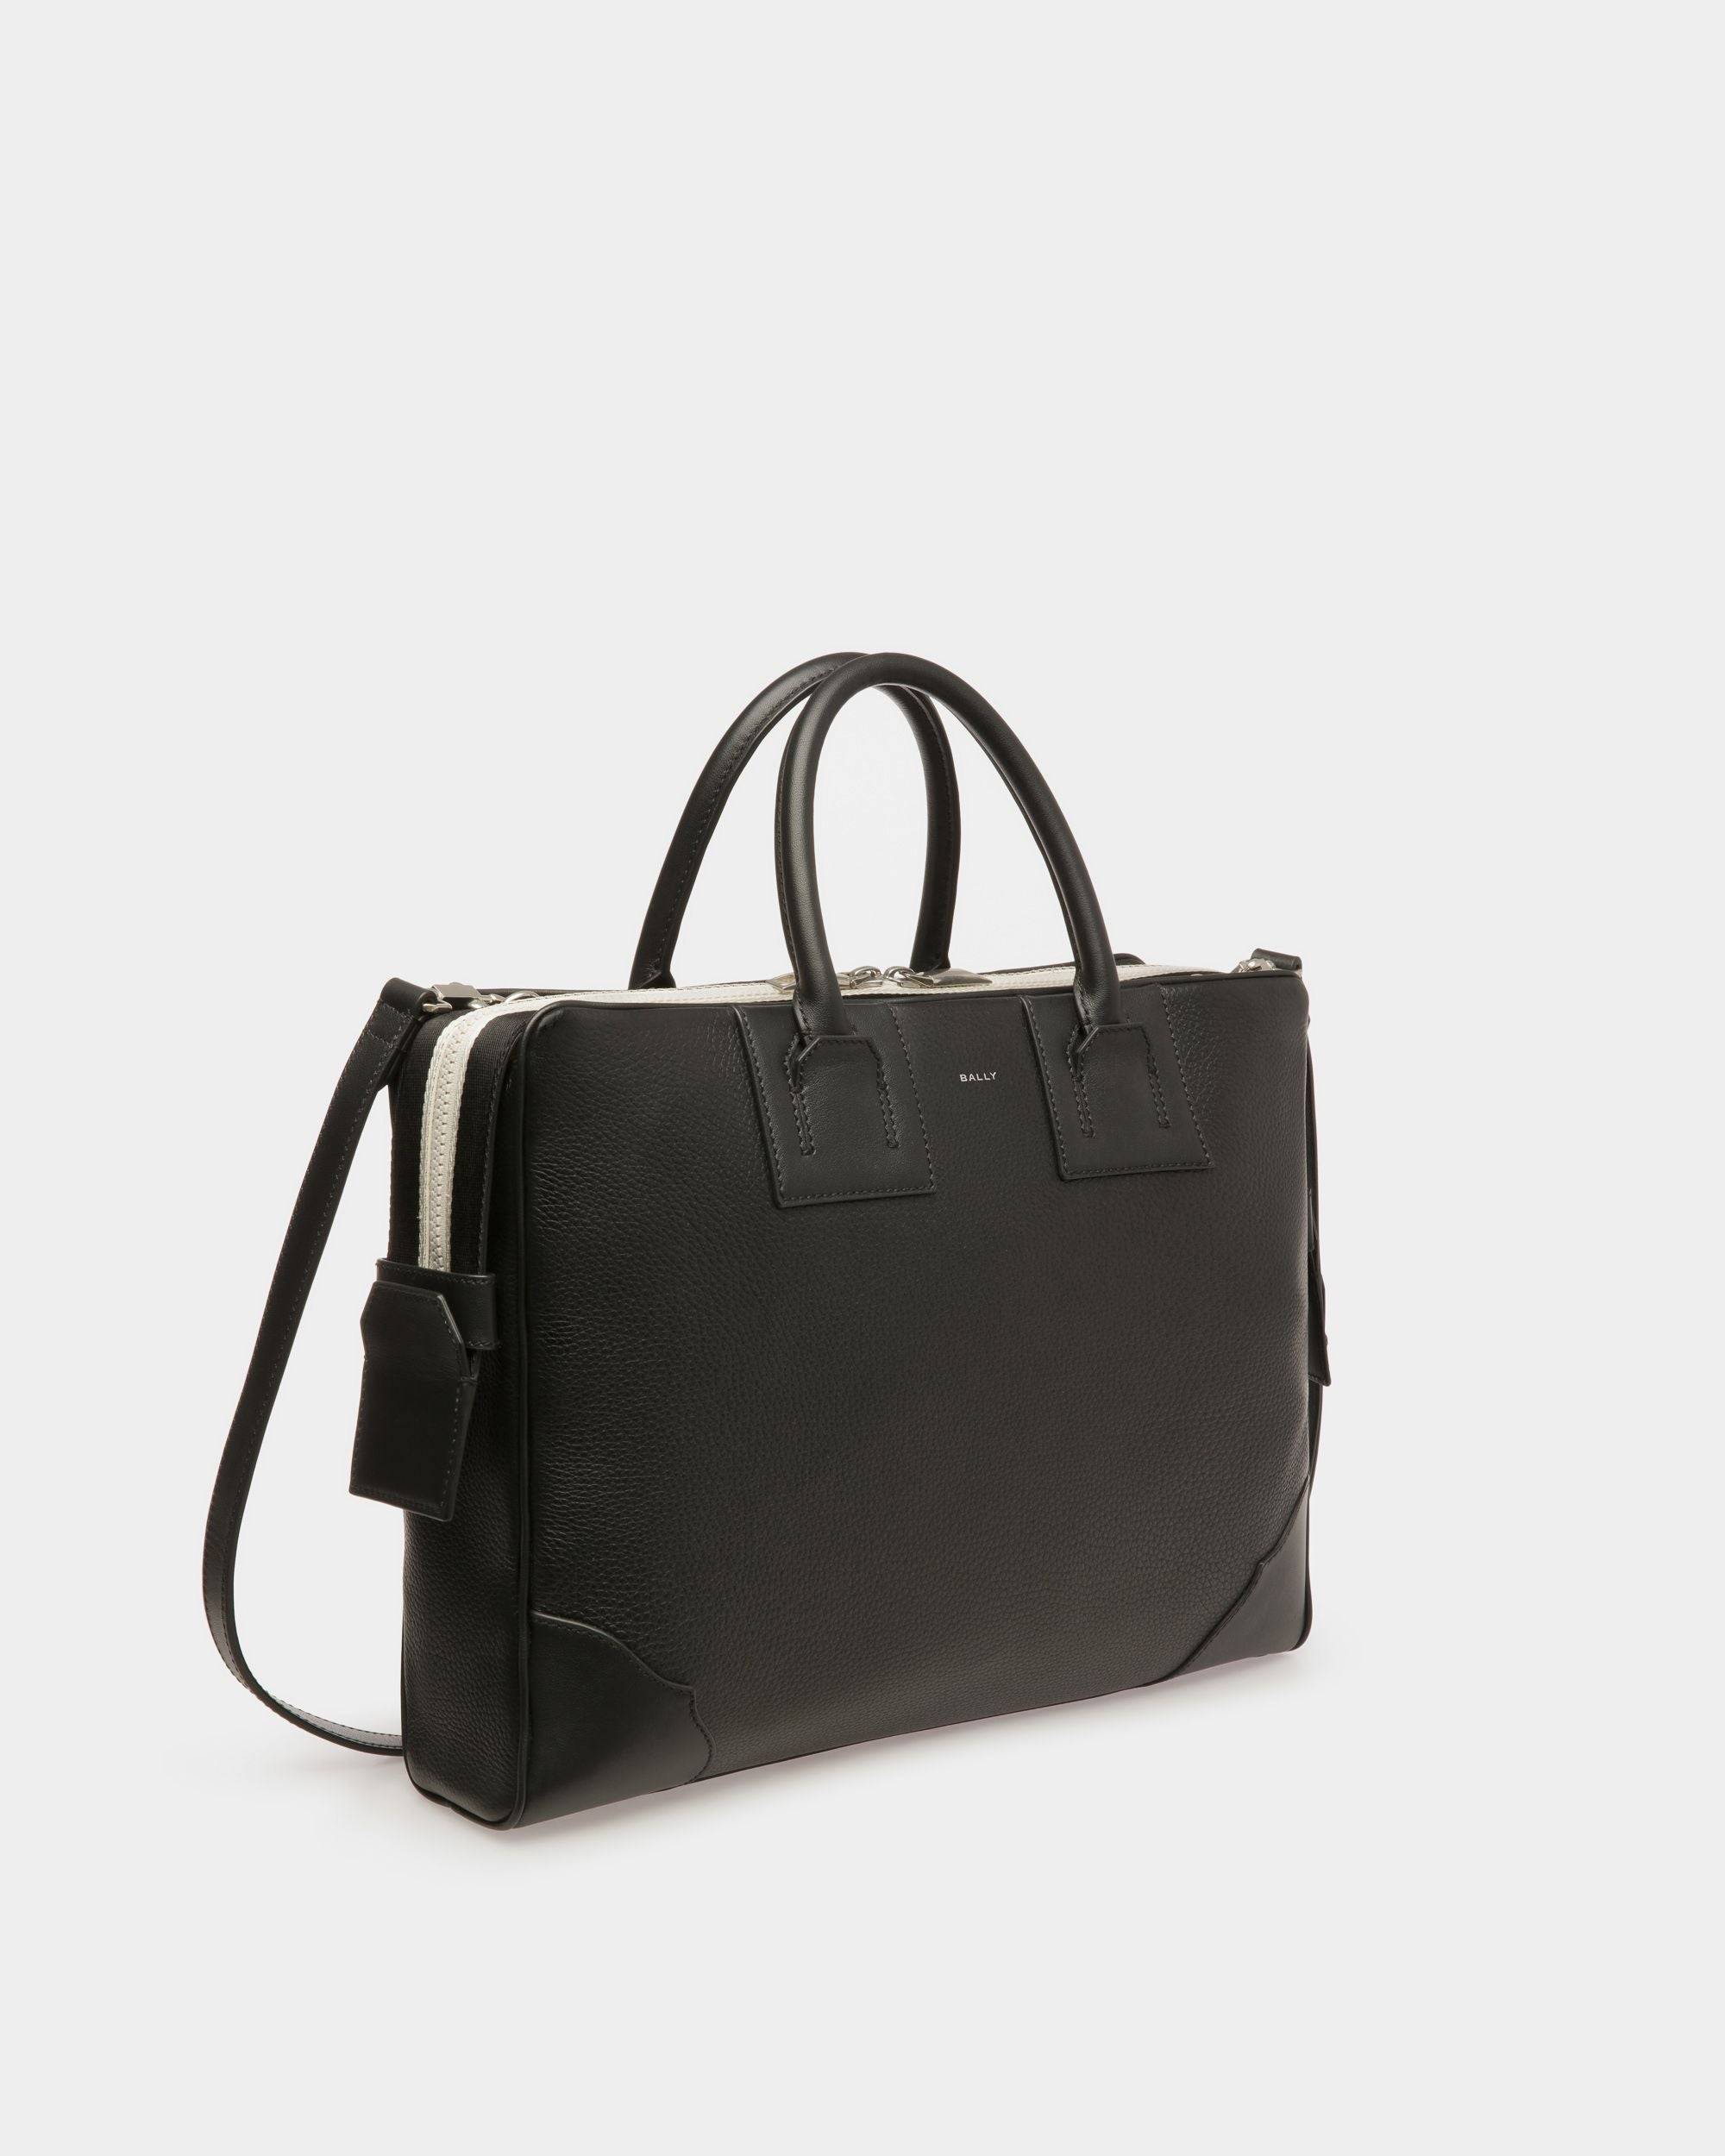 Bord Brief | Men's Business Bag | Black Leather | Bally | Still Life 3/4 Front